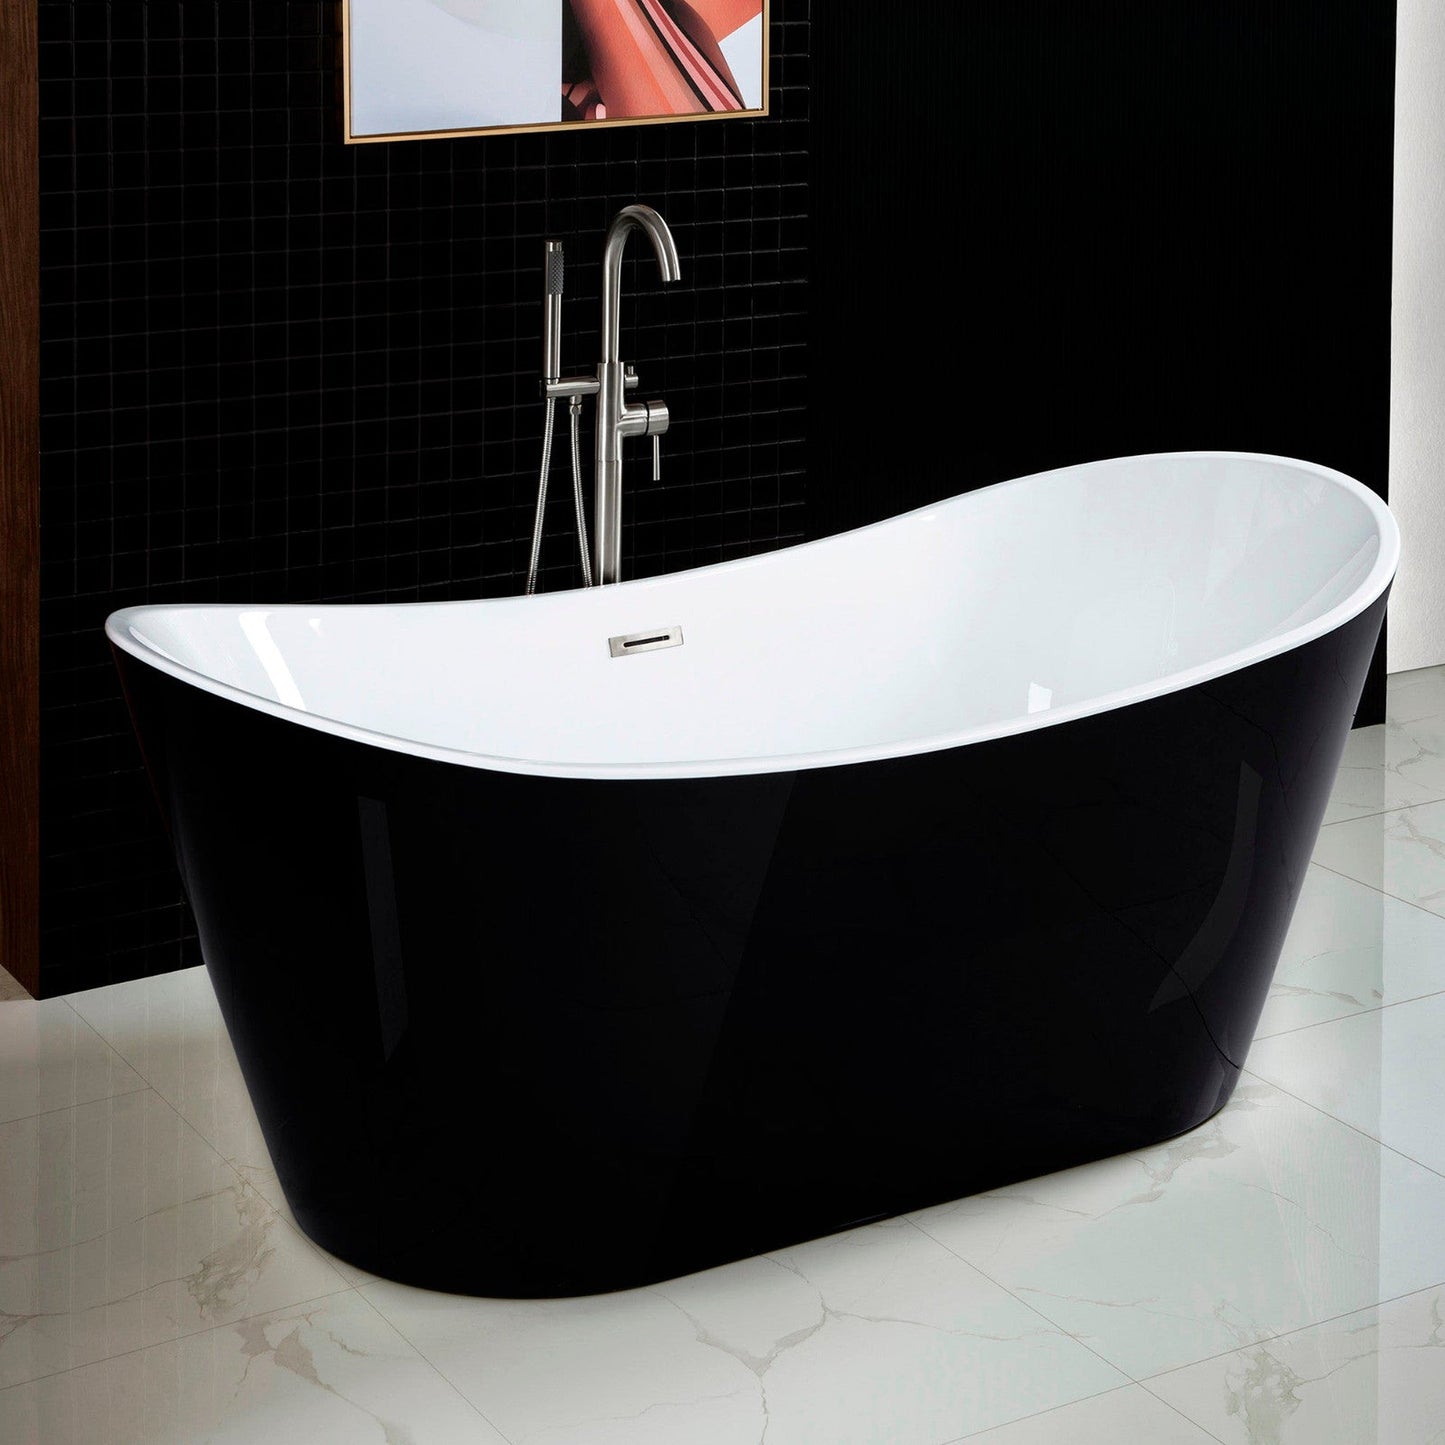 WoodBridge B1815 67" Black Acrylic Freestanding Contemporary Soaking Bathtub With Brushed Nickel Drain, Overflow, F0070BNVT Tub Filler and Caddy Tray